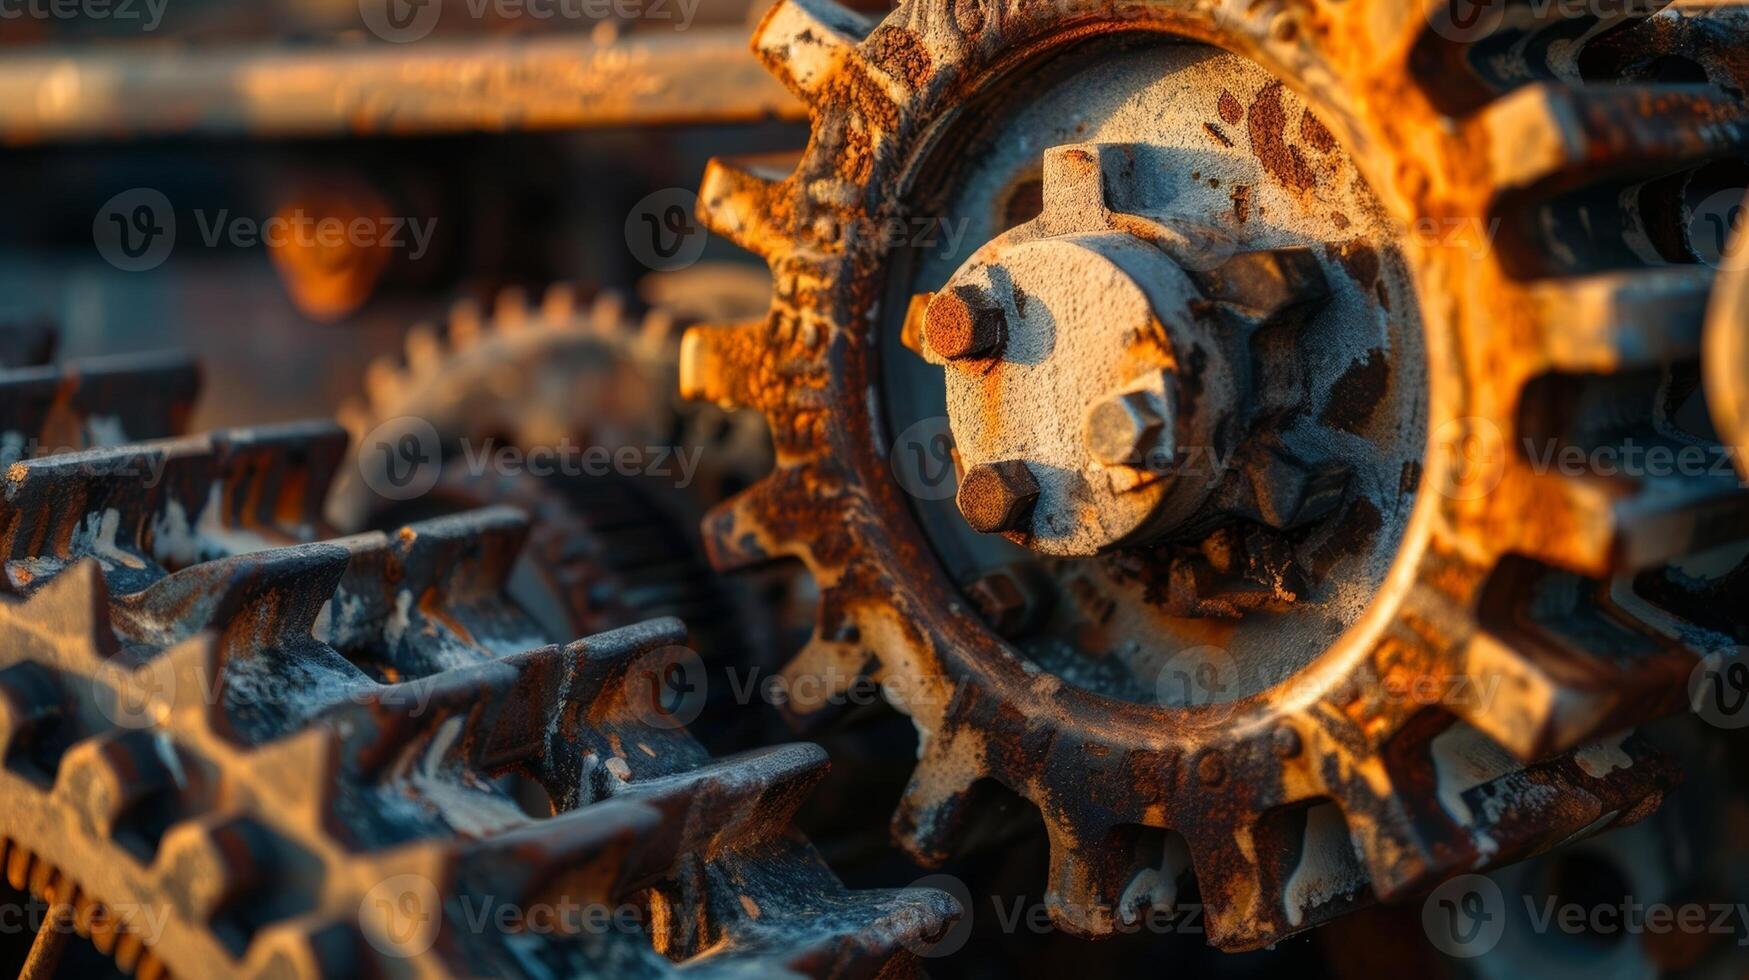 A set of worn and weathered gears and pulleys catch the afternoon sunlight hinting at a time when construction machinery was powered by manpower instead of technology photo